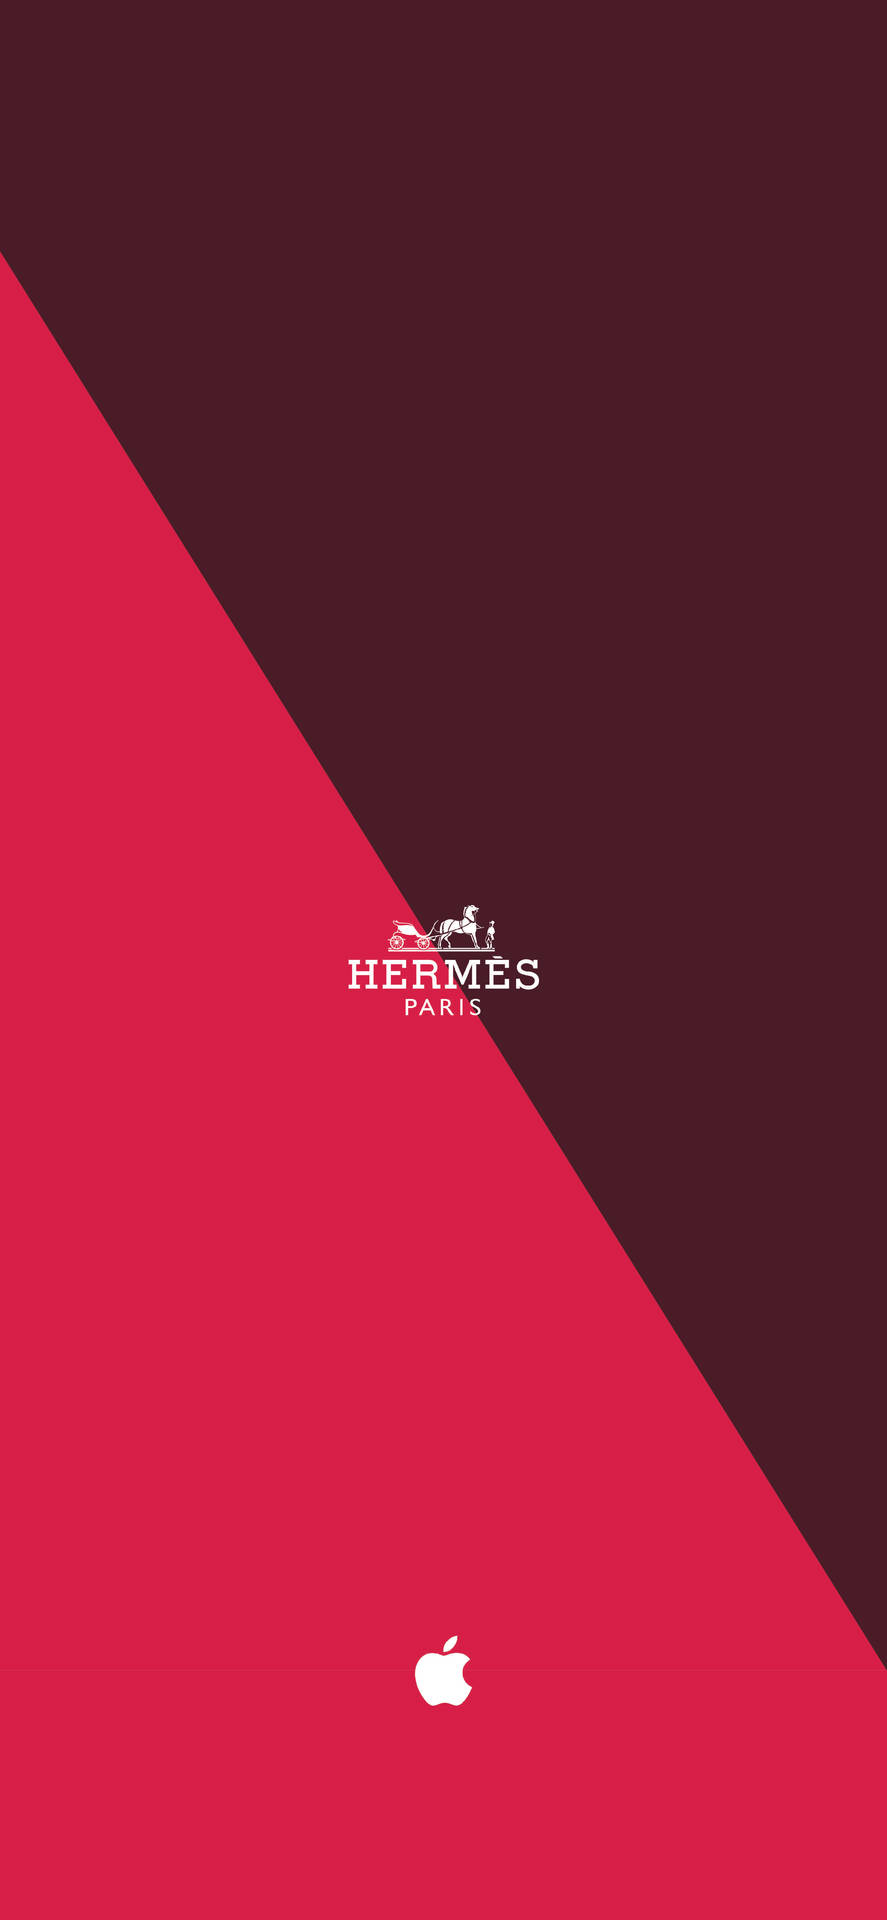 Duotone Hermes Pink And Maroon Background